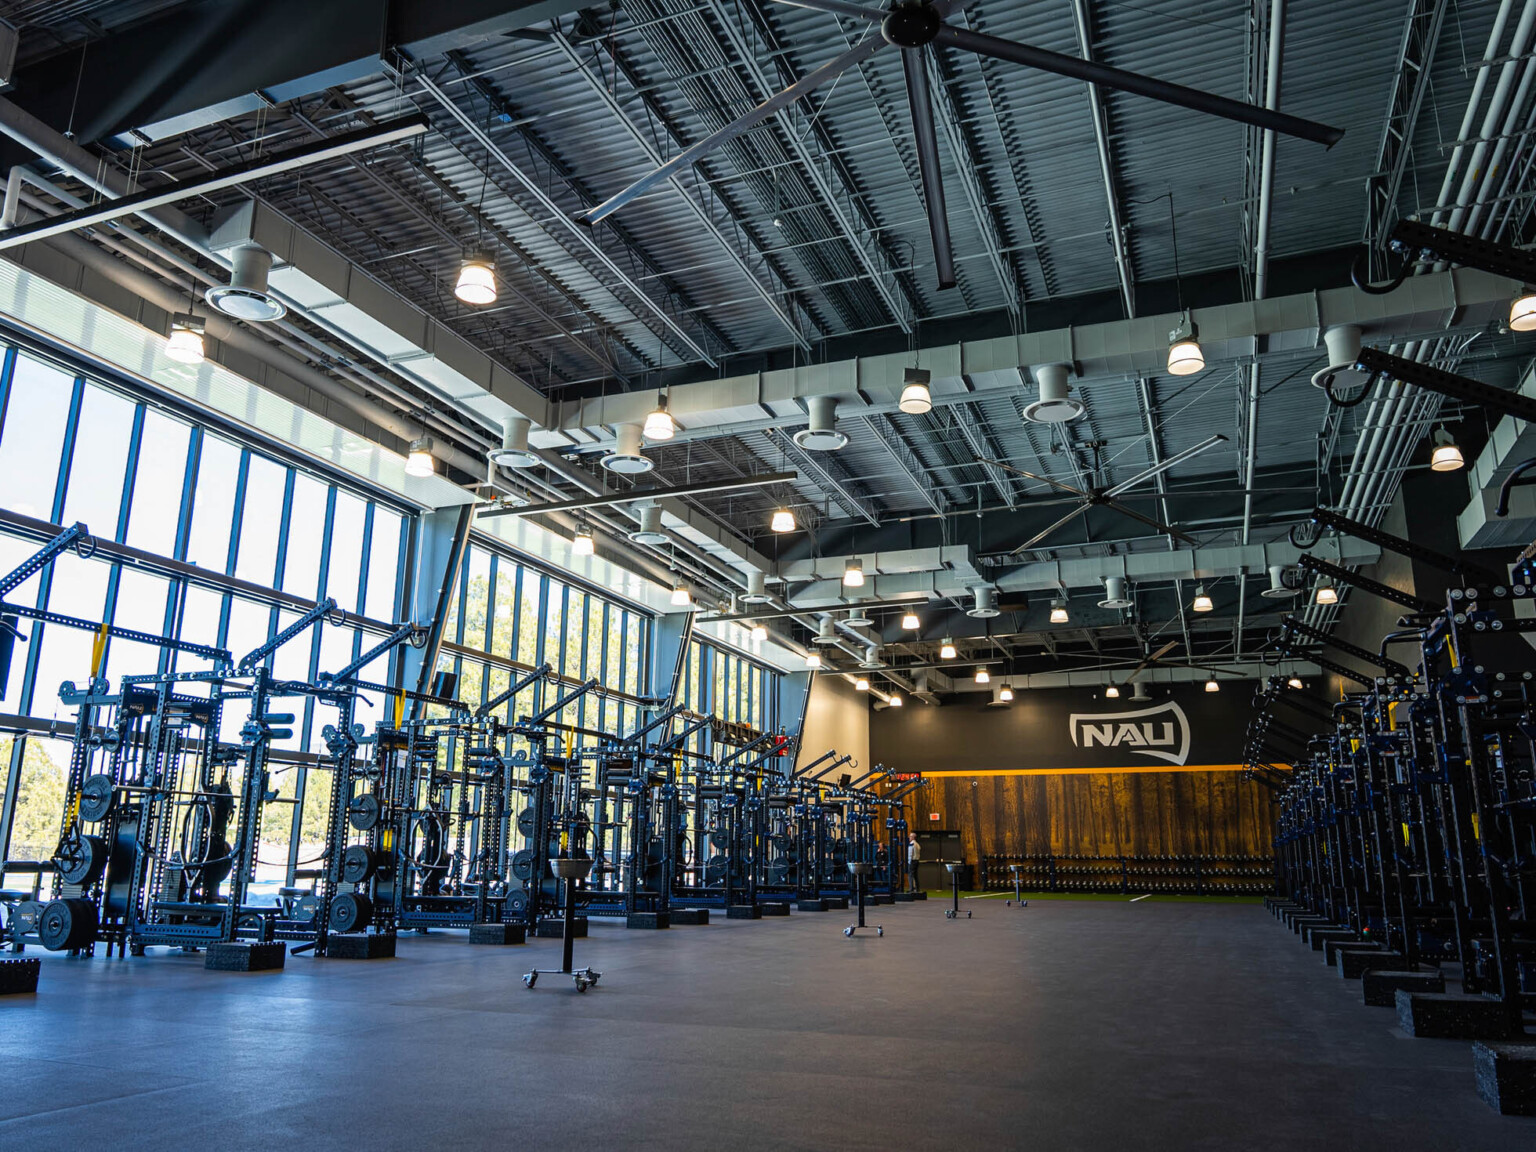 high black open ceiling weight training room with floor to ceiling operable glass doors and super graphic wall with NAU logo